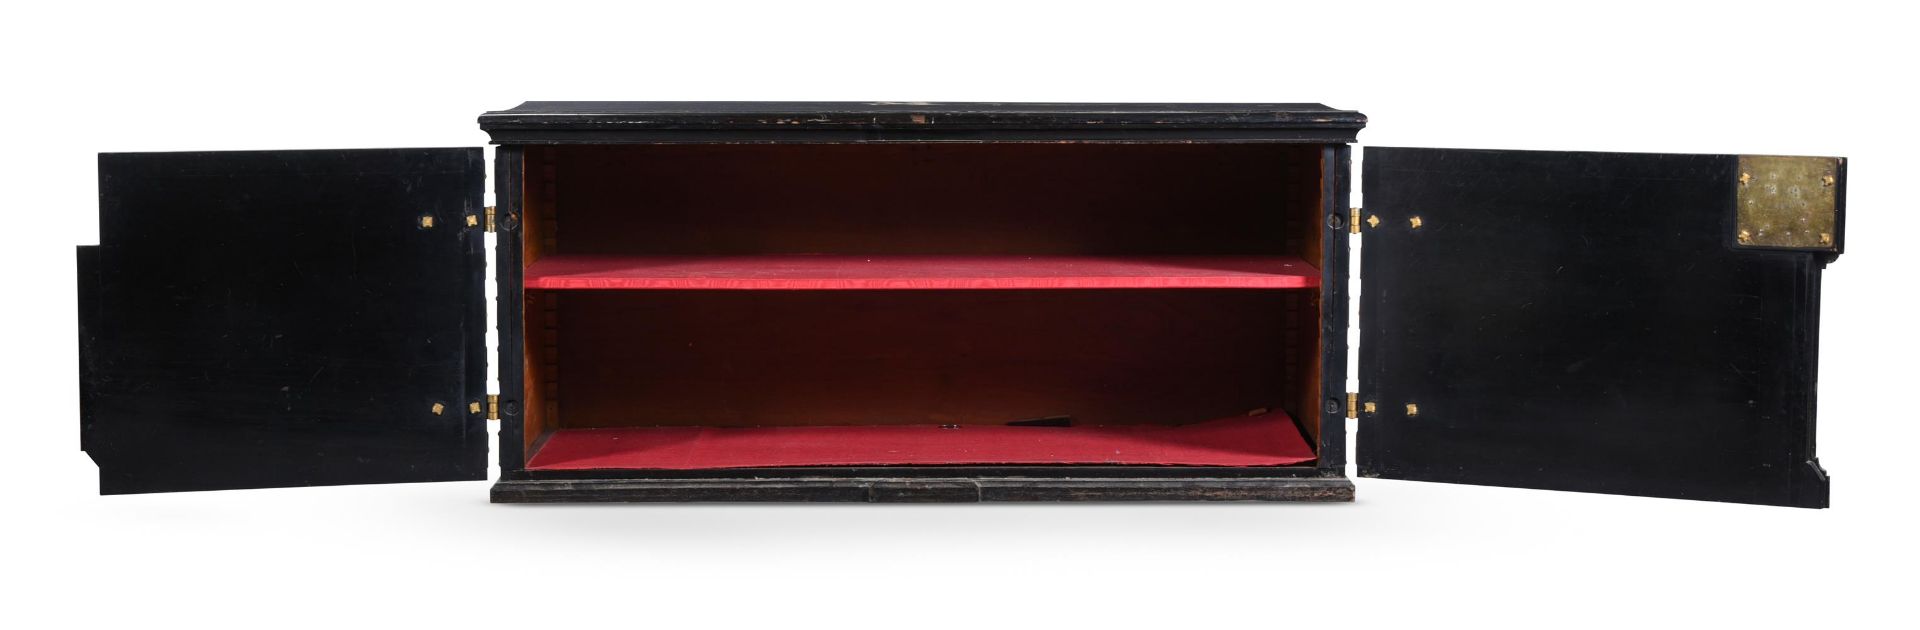 A LARGE EBONISED AND BRASS MOUNTED 'ZANZIBAR' CHEST, EARLY 20TH CENTURY AND LATER - Image 5 of 5